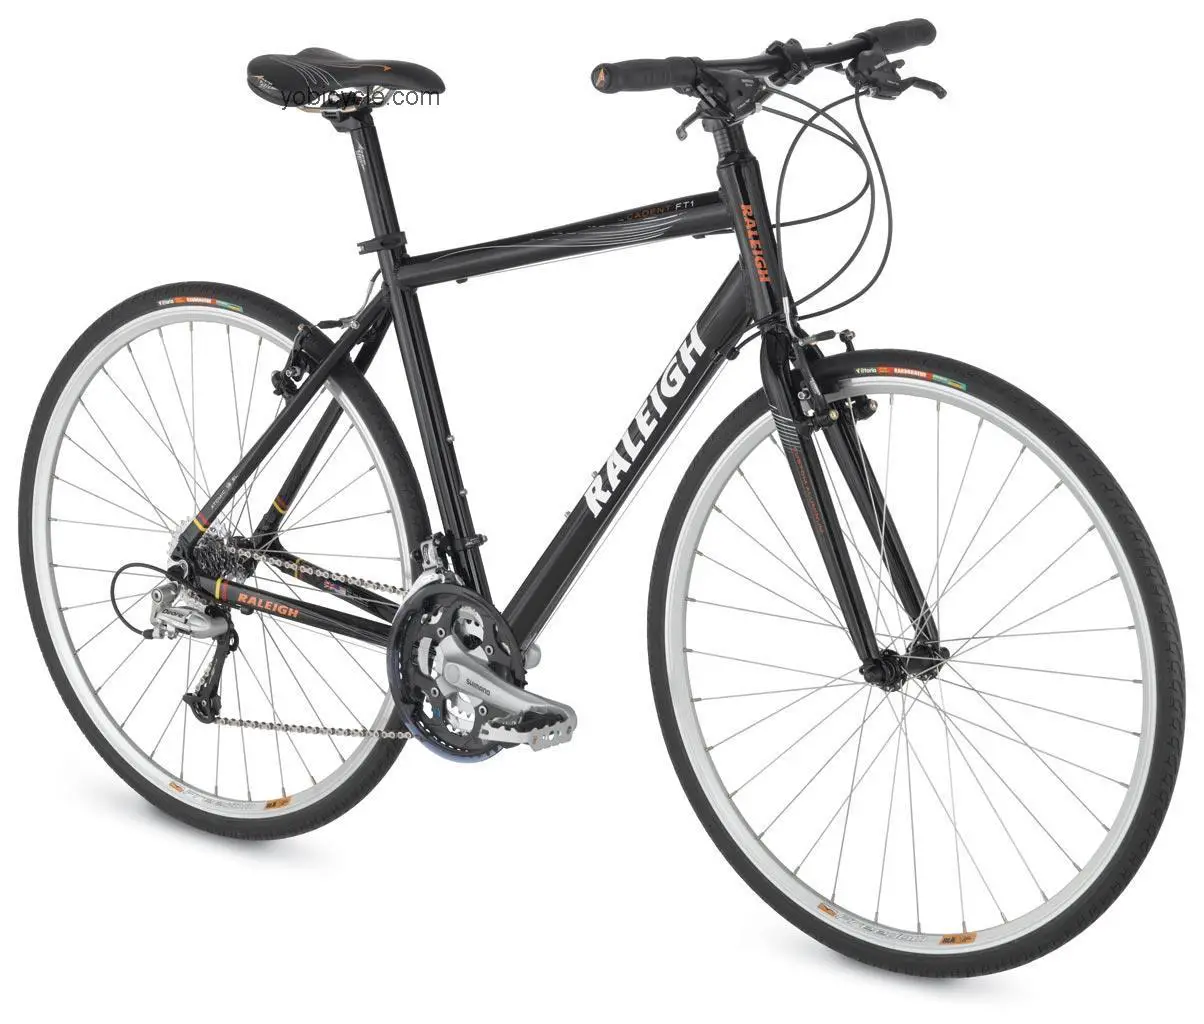 Raleigh Cadent FT1 2009 comparison online with competitors